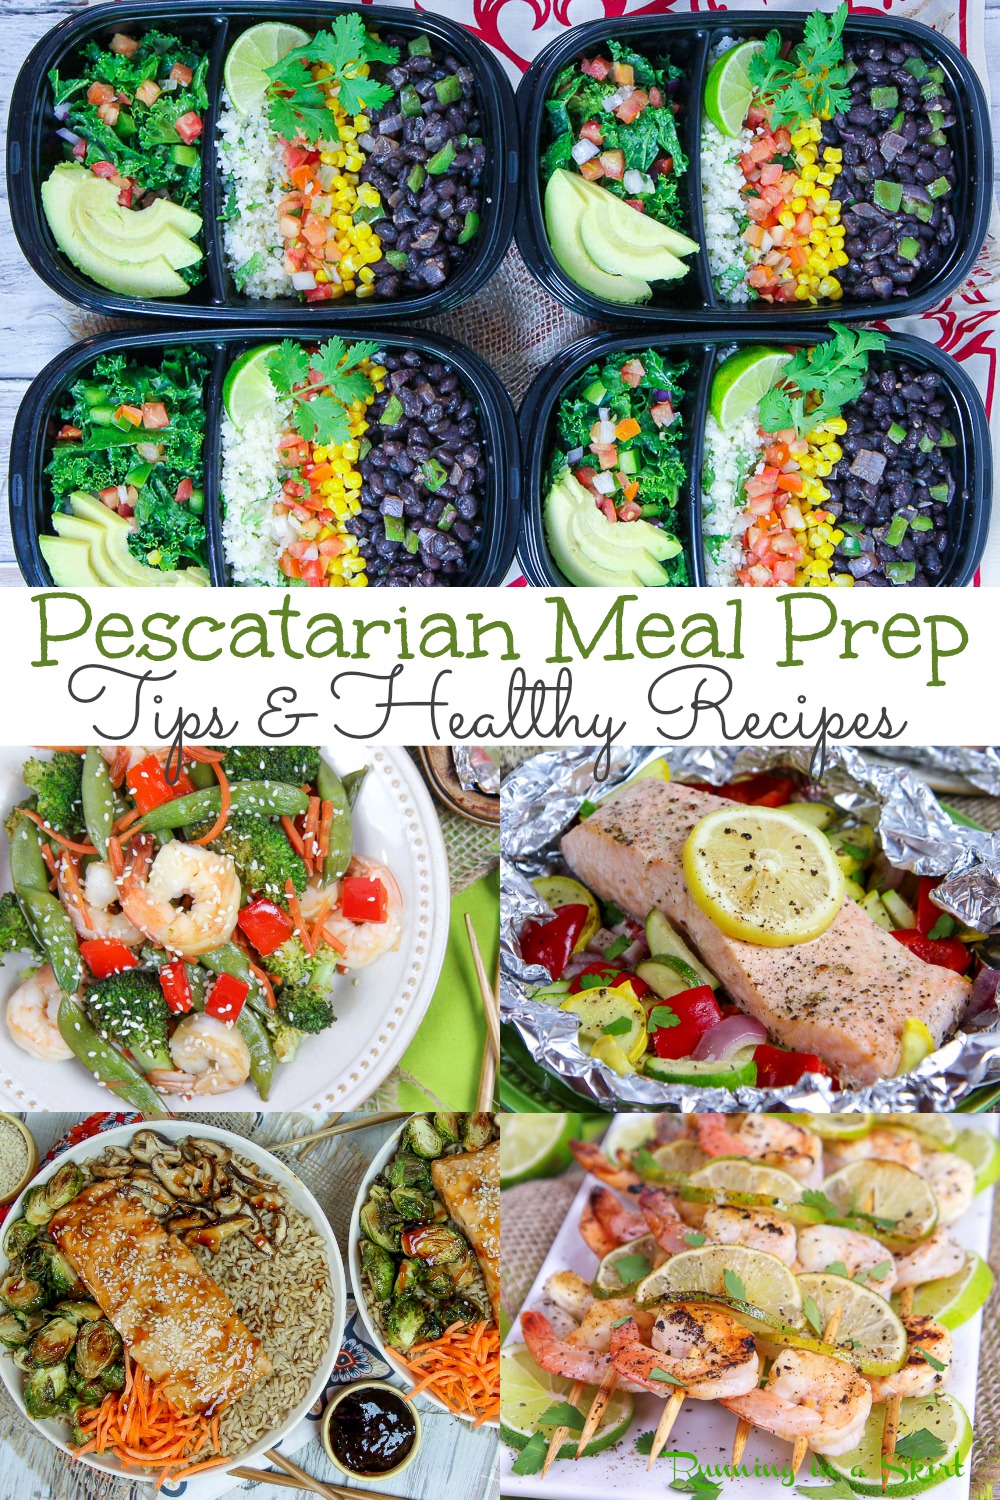 Pescatarian Meal Prep for the week including healthy, clean eating, easy breakfast, lunch, and dinner ideas. Includes plant based vegetarian, seafood - fish (salmon, shrimp), vegan and low carb and weight loss recipes. Also has tips and tricks (including the best containers) for meal prep success. Super delicious! / Running in a Skirt #pescatarian #mealprep #healthy #healthyliving #vegetarian via @juliewunder